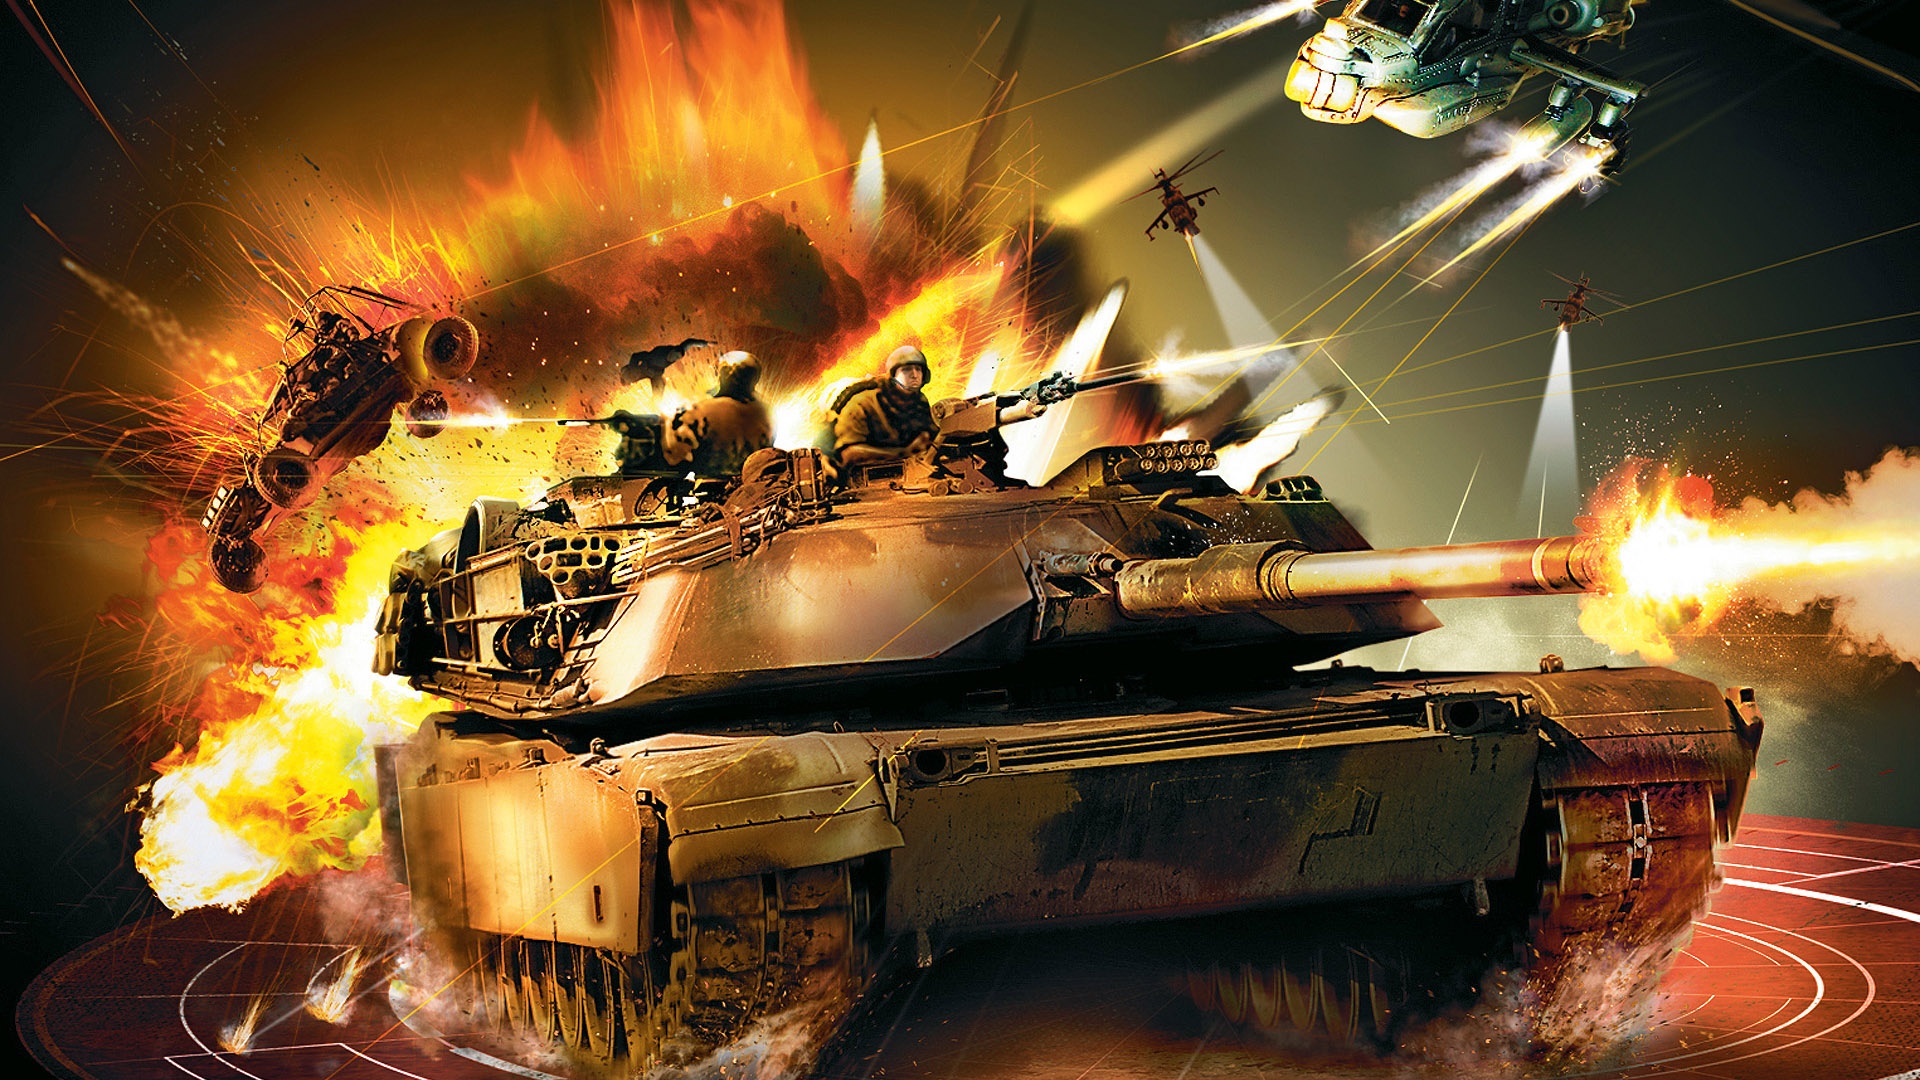 Cool Military Tank Wallpaper Galleryhip The